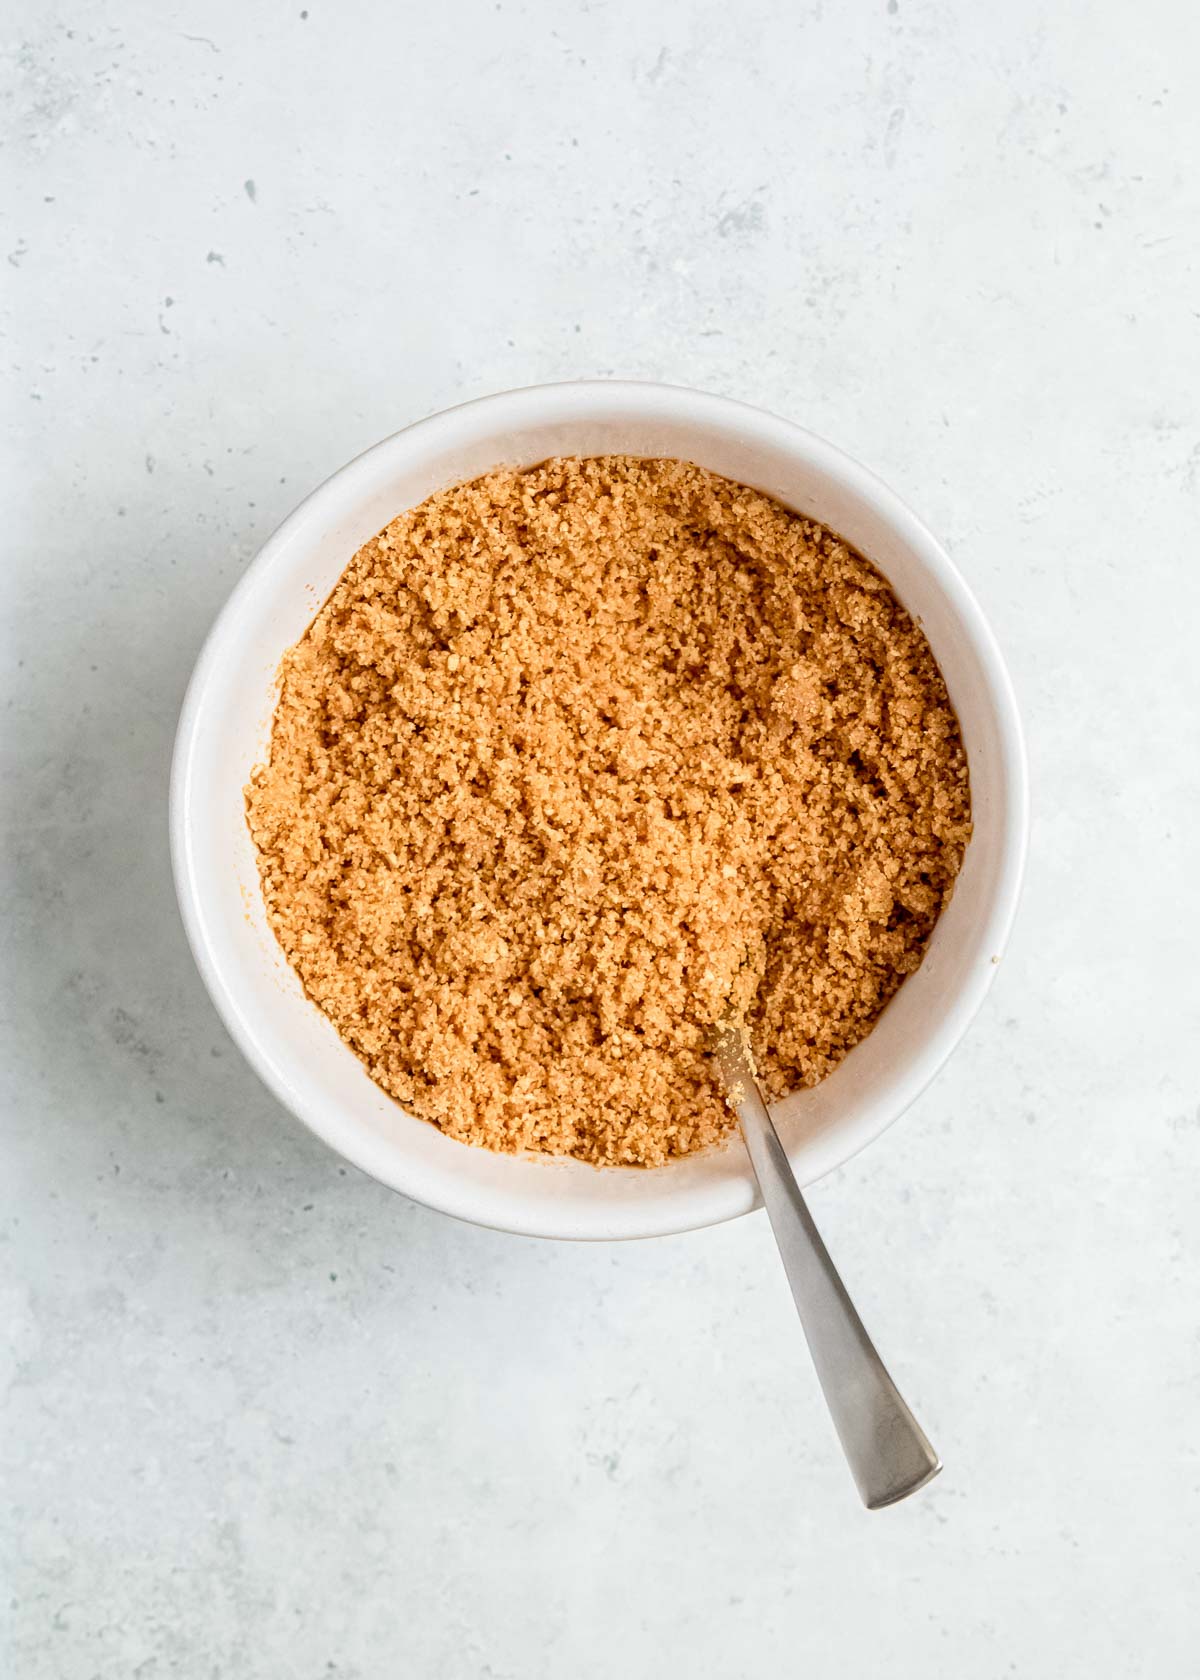 combine graham cracker crumbs, butter, and sugar for the crust